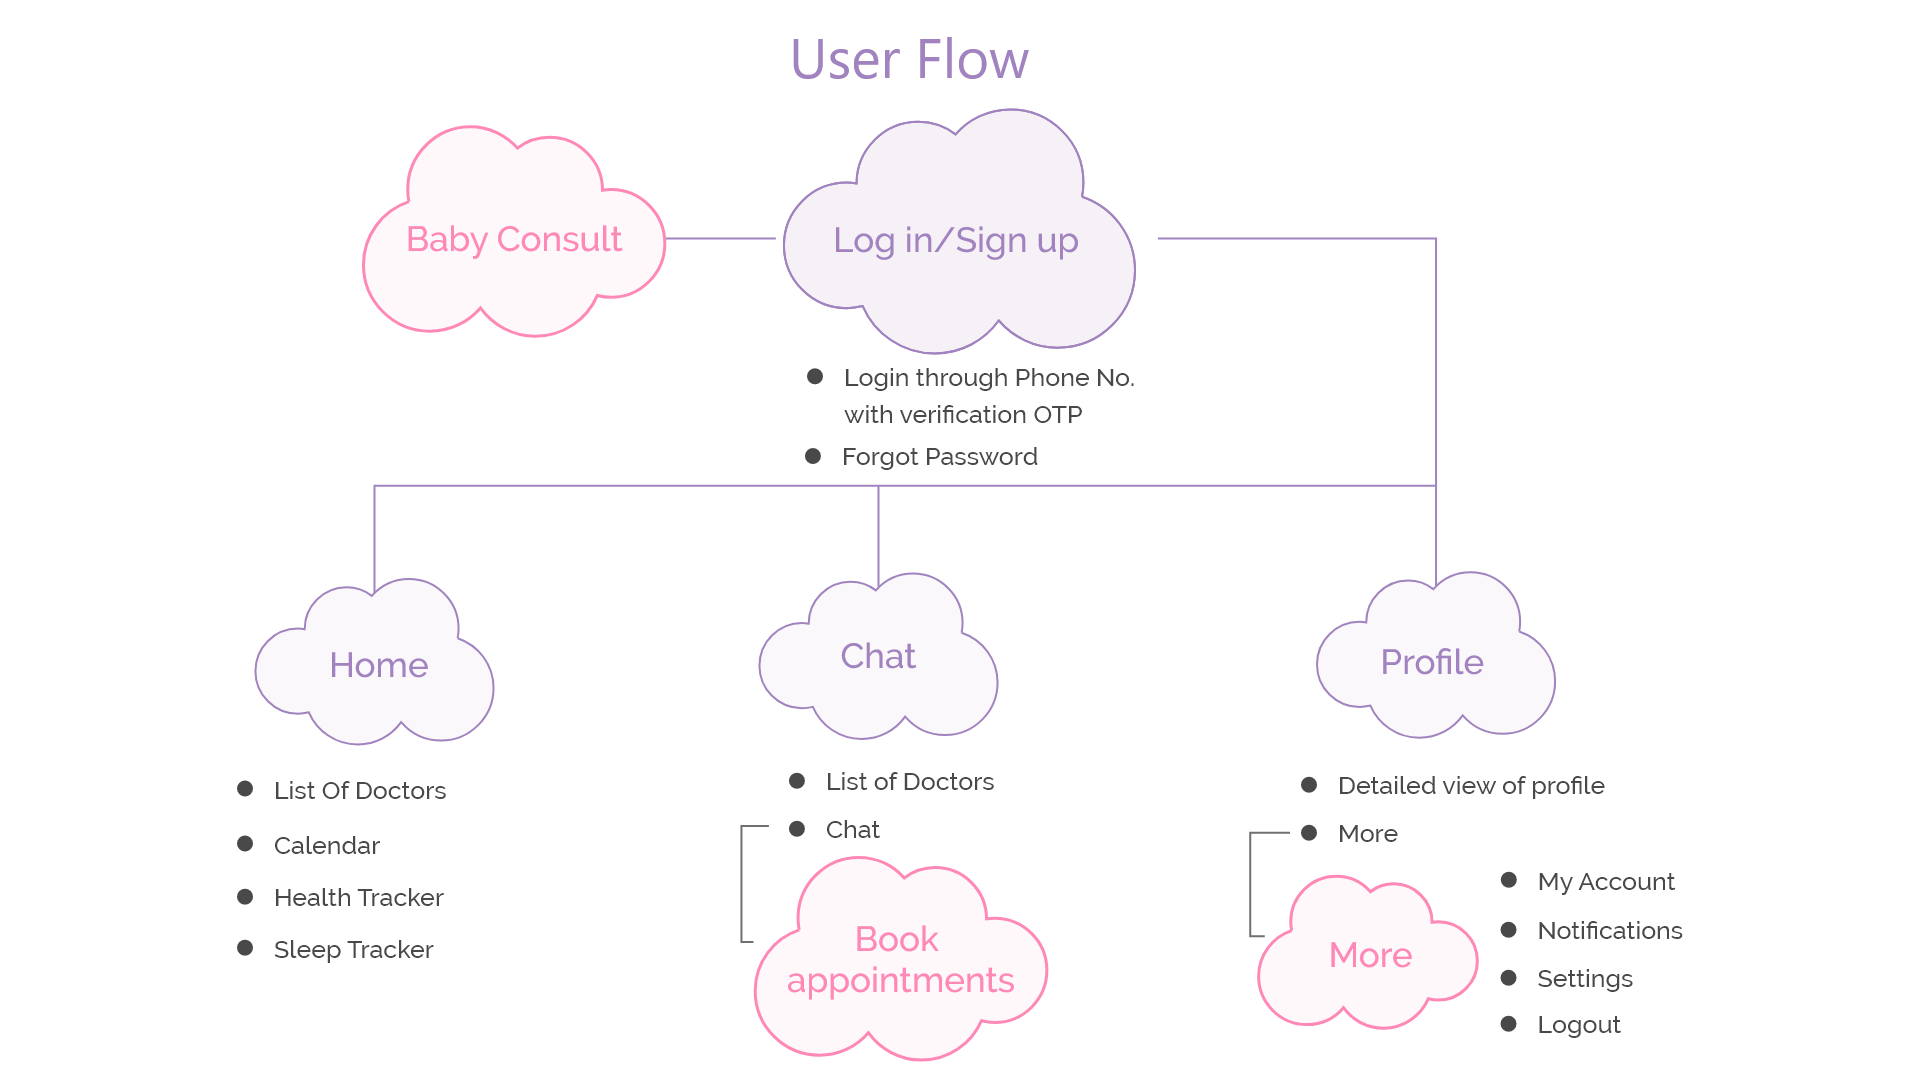 user flow of baby consult